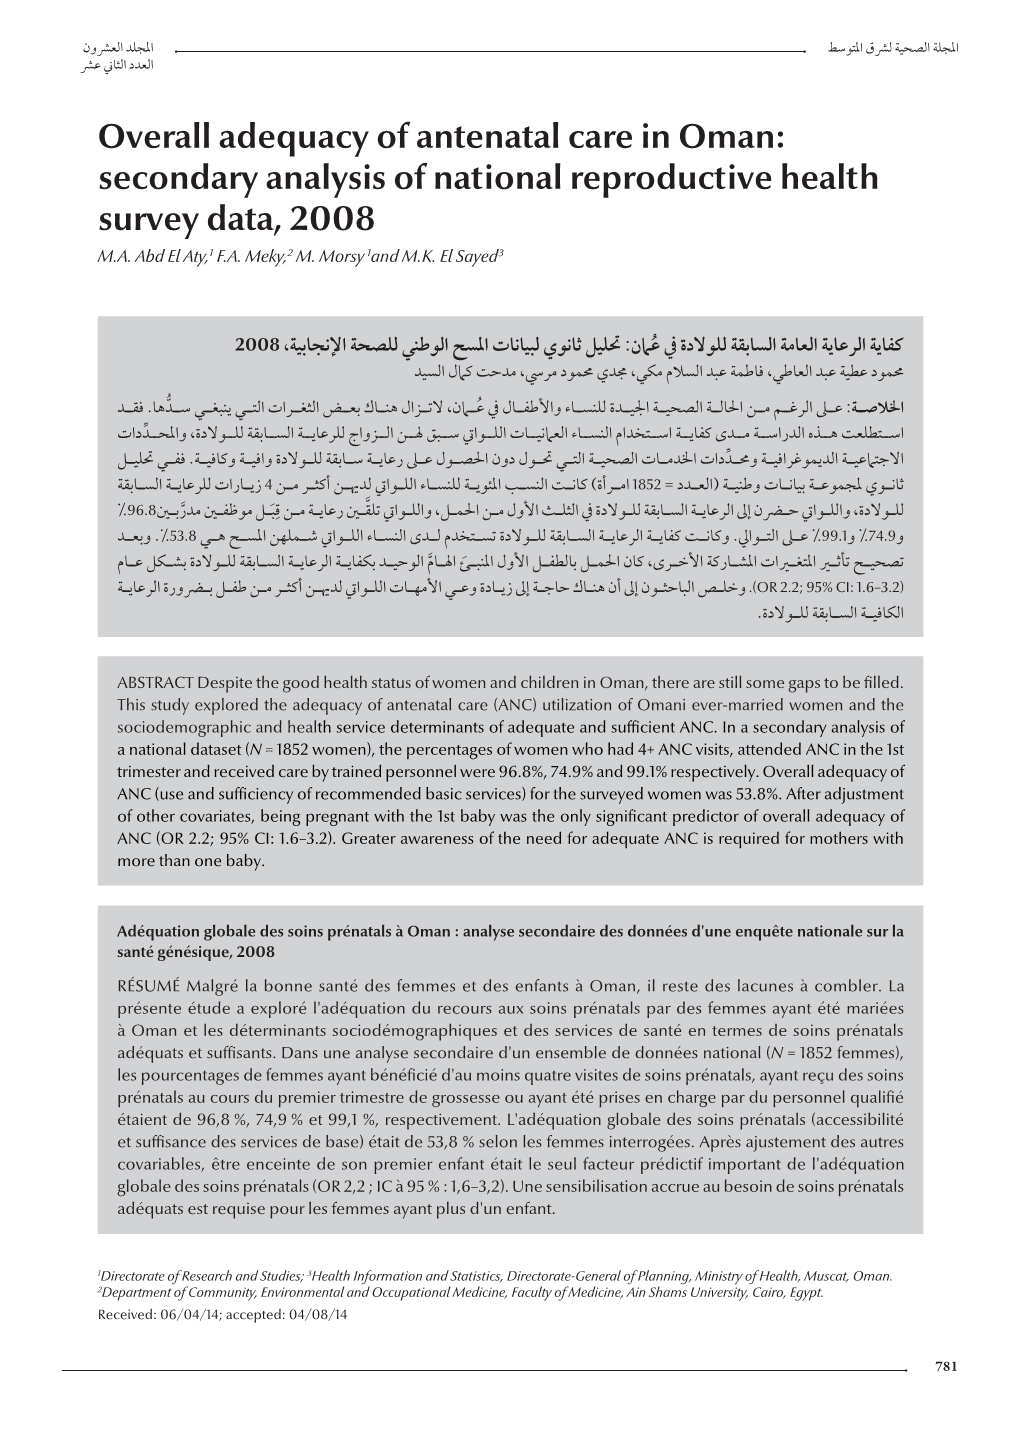 Overall Adequacy of Antenatal Care in Oman: Secondary Analysis of National Reproductive Health Survey Data, 2008 M.A